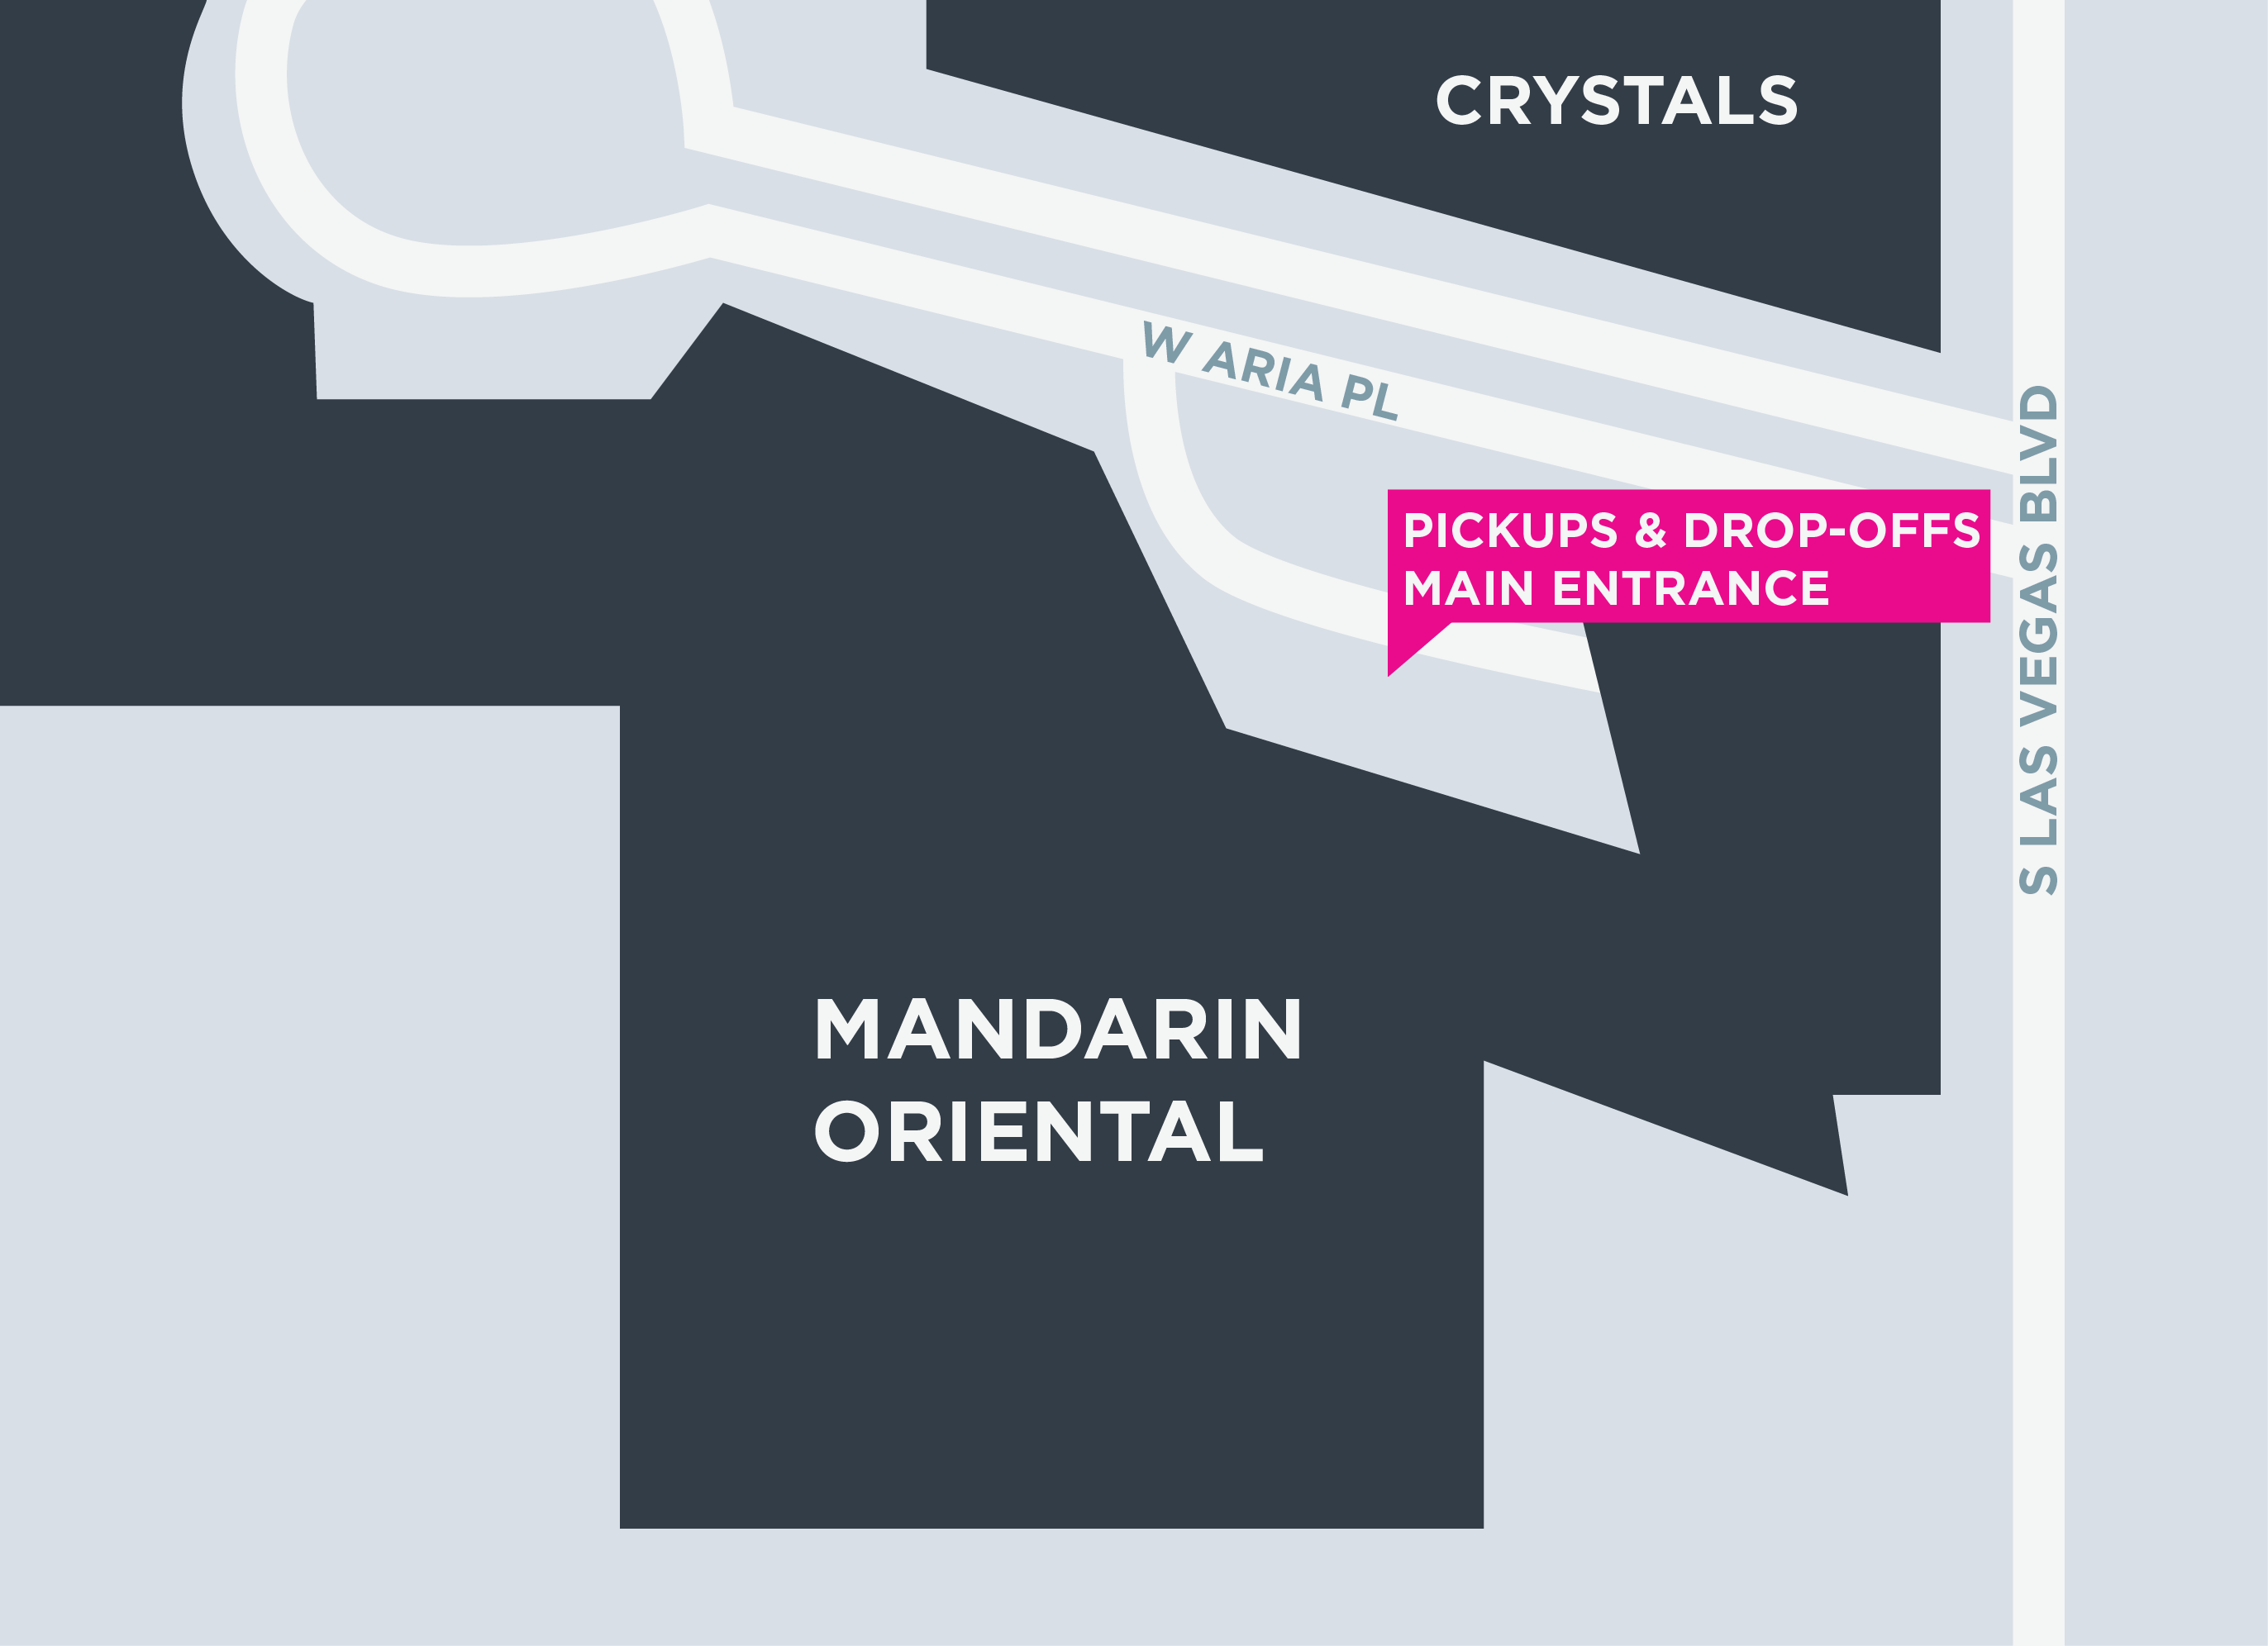 This image shows a map of the Mandarin Oriental, including pickup and dropoff areas.